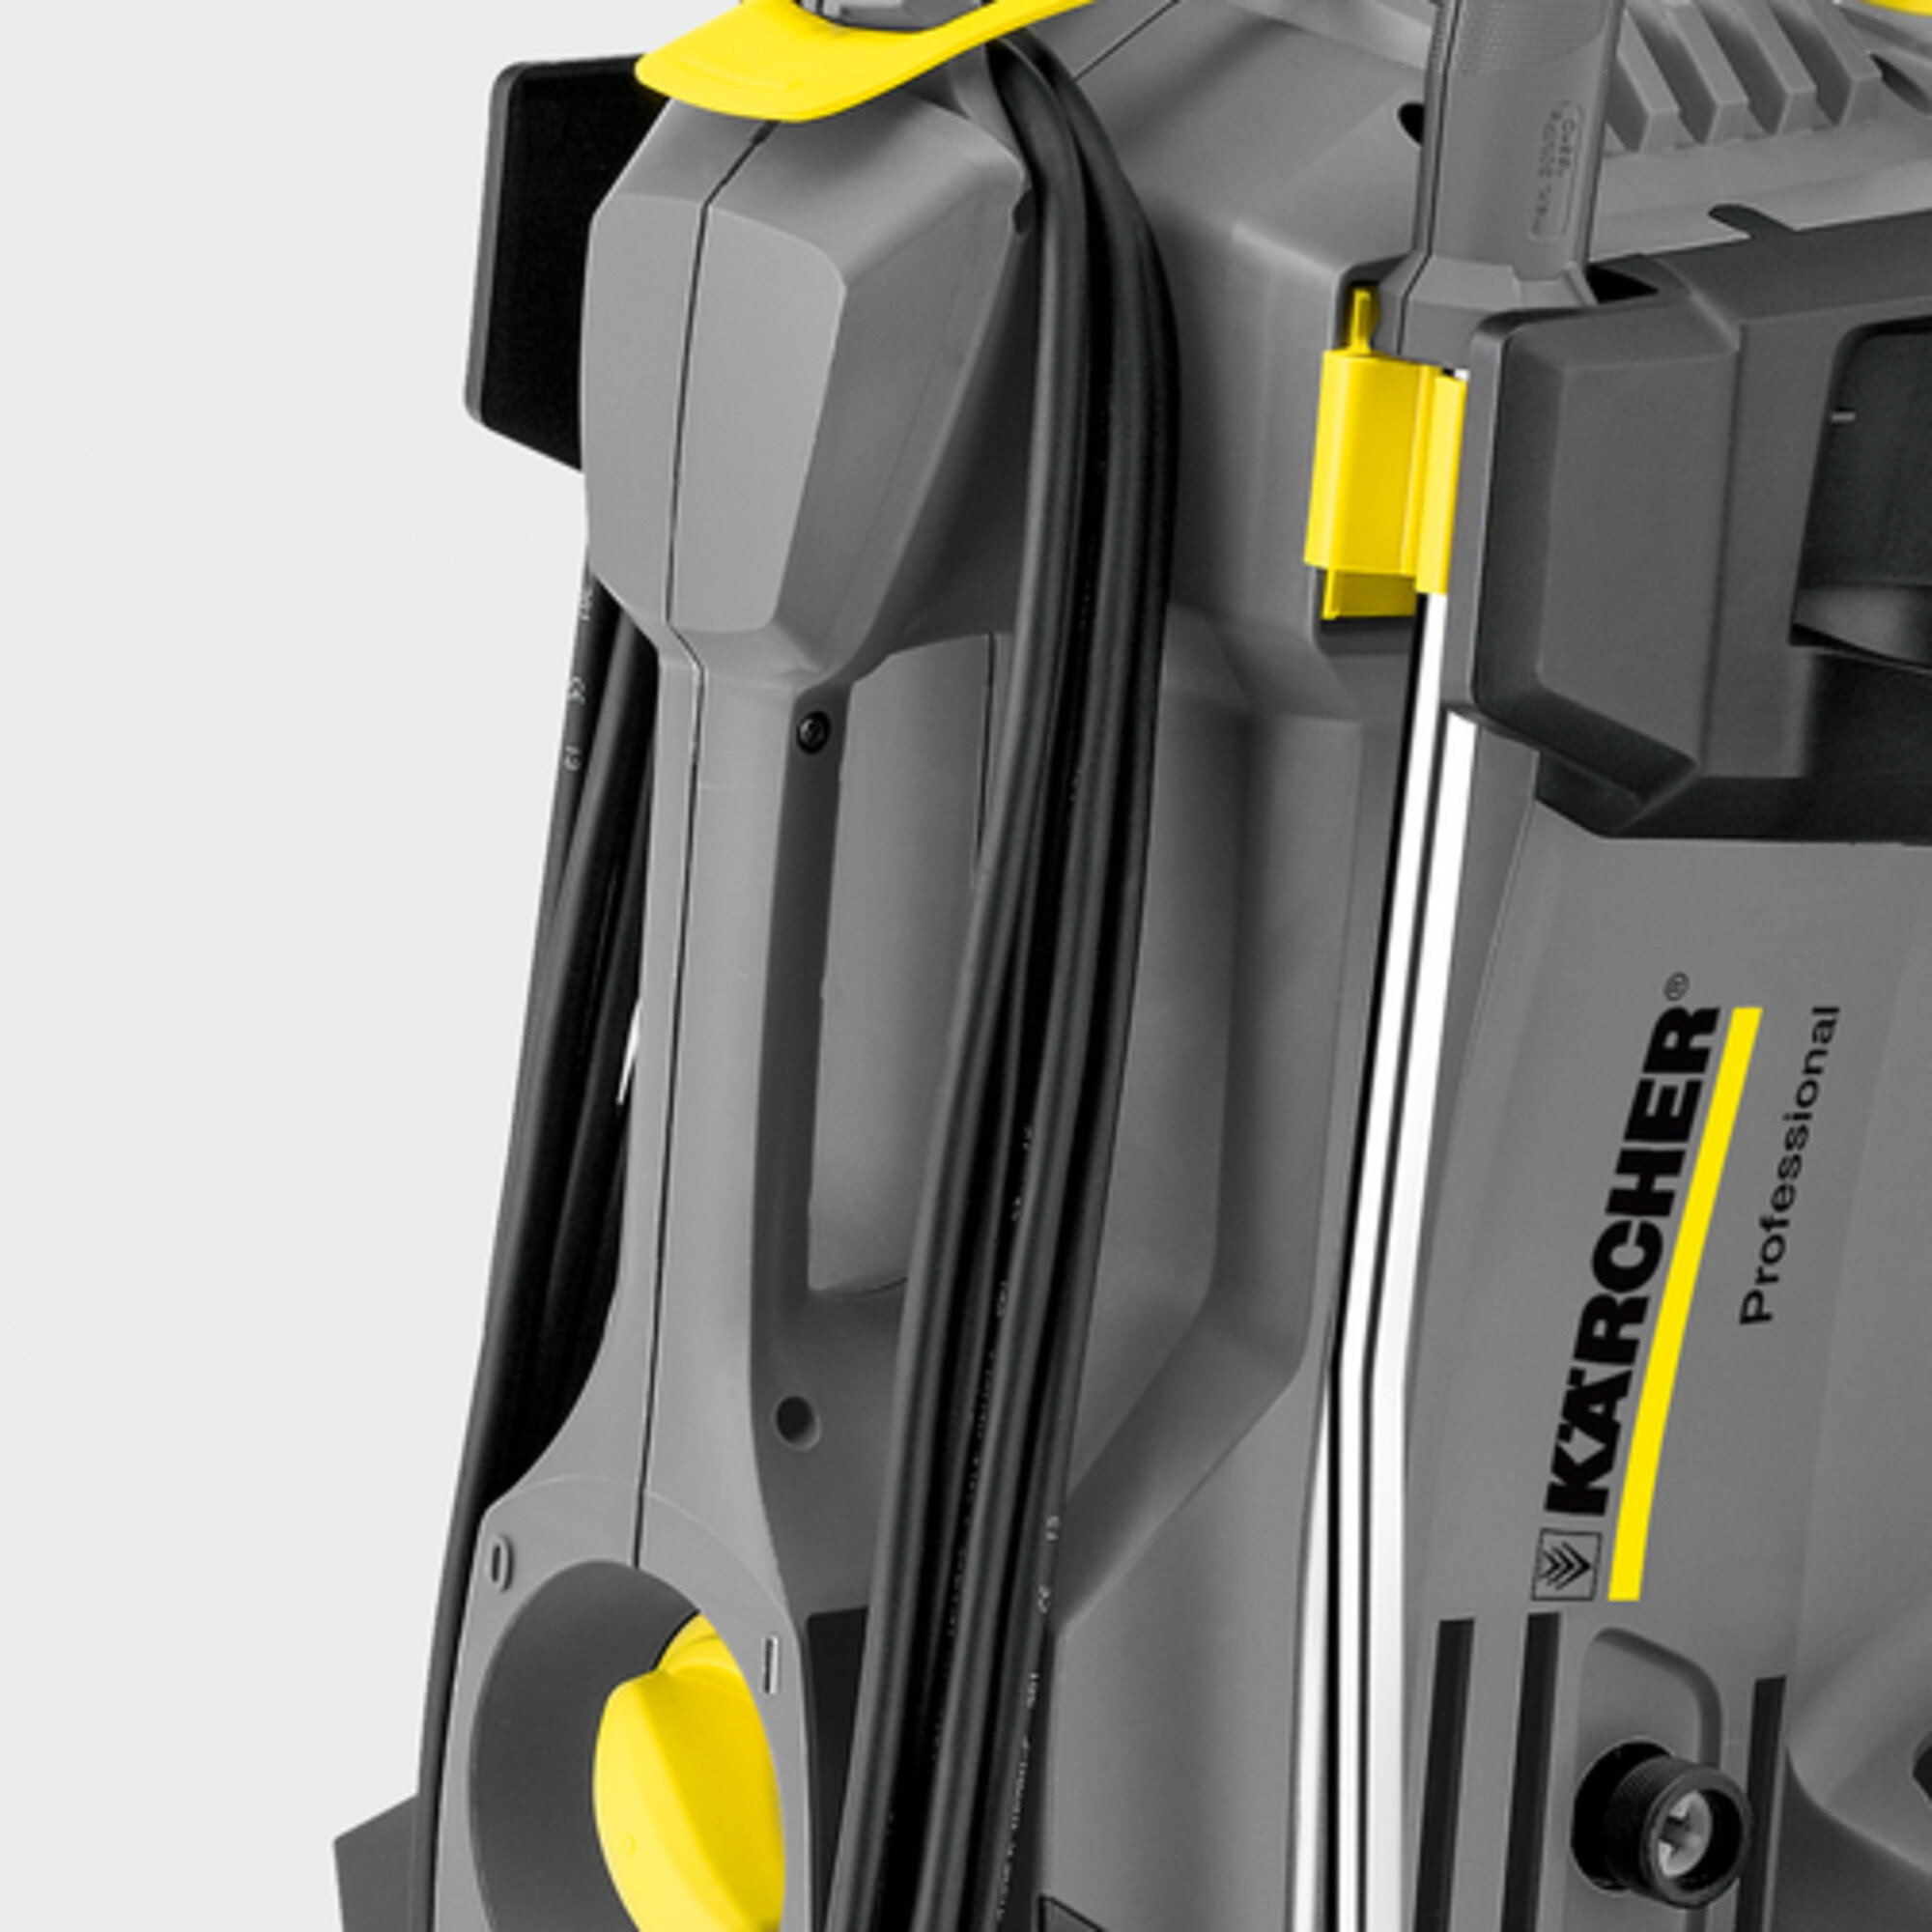 High-pressure washer HD 5/11 P: Excellent mobility